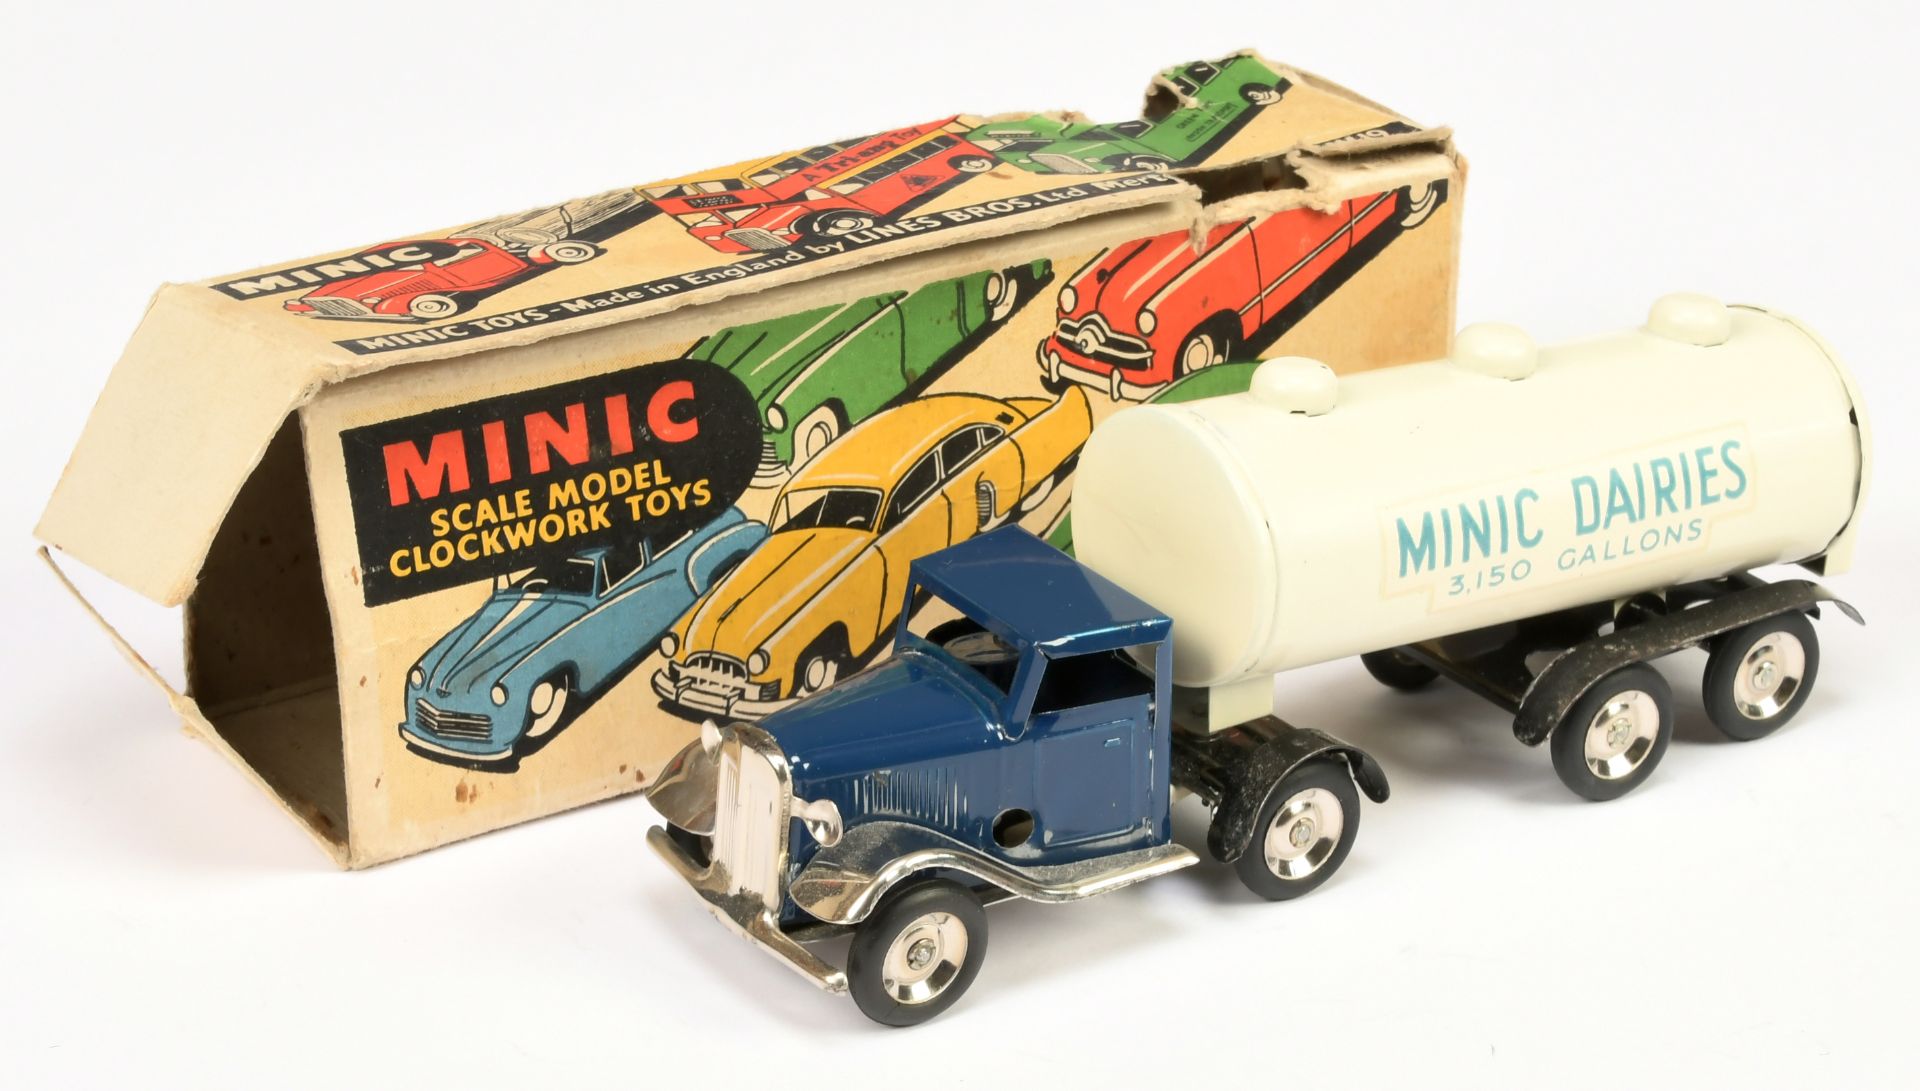 Triang Minic Clockwork 71M "Minic Dairies" Articulated Truck and Tanker Trailer - Blue cab with W...